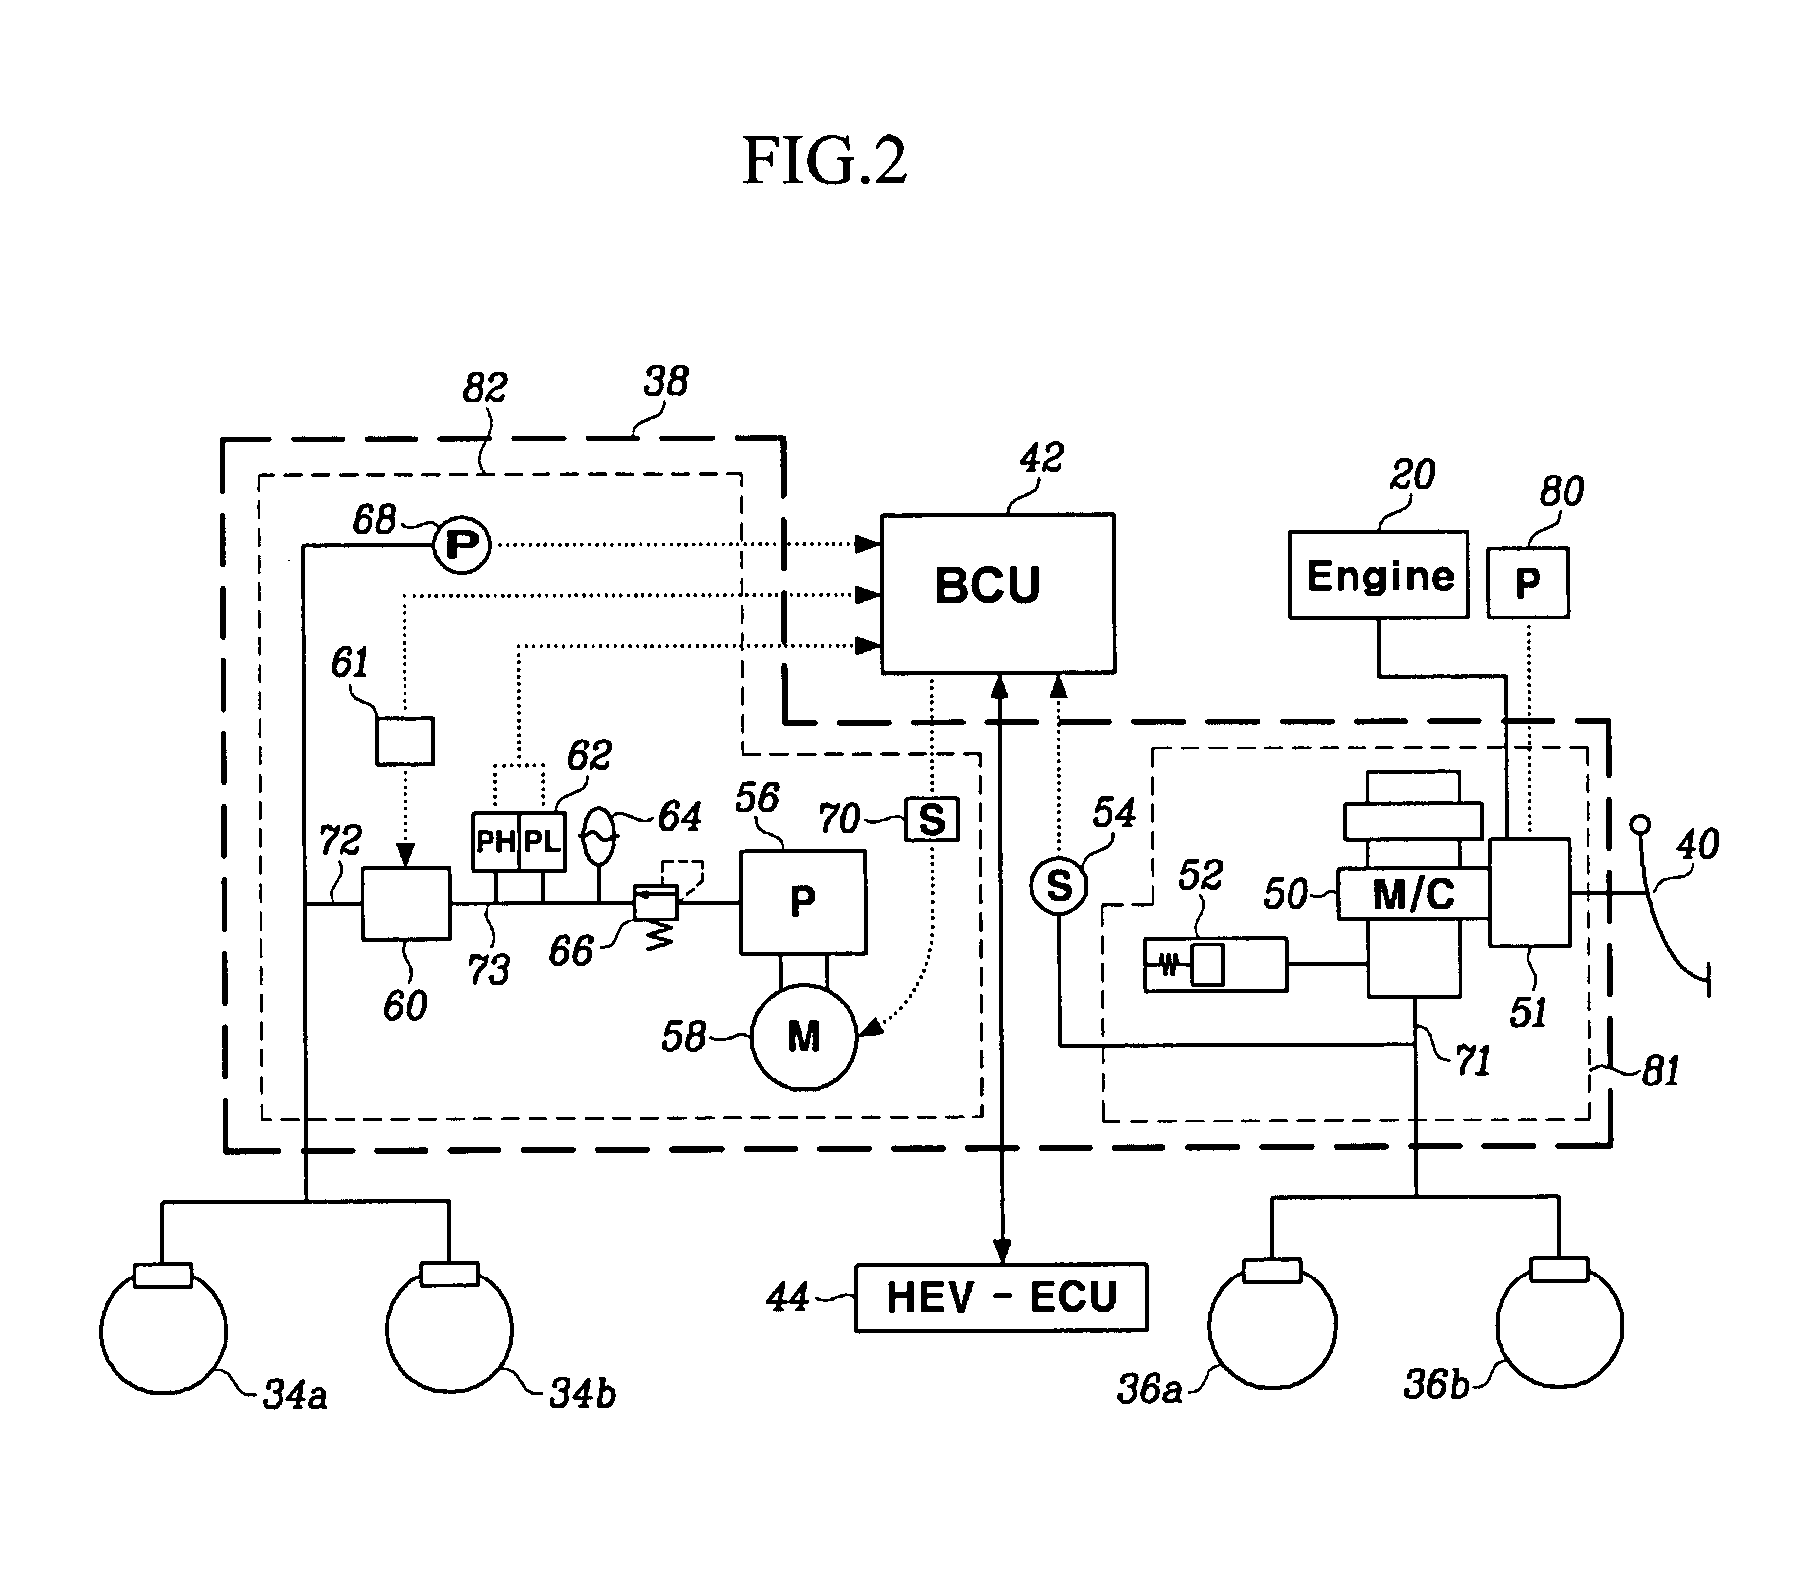 Apparatus and method for controlling regenerative braking of an electric vehicle